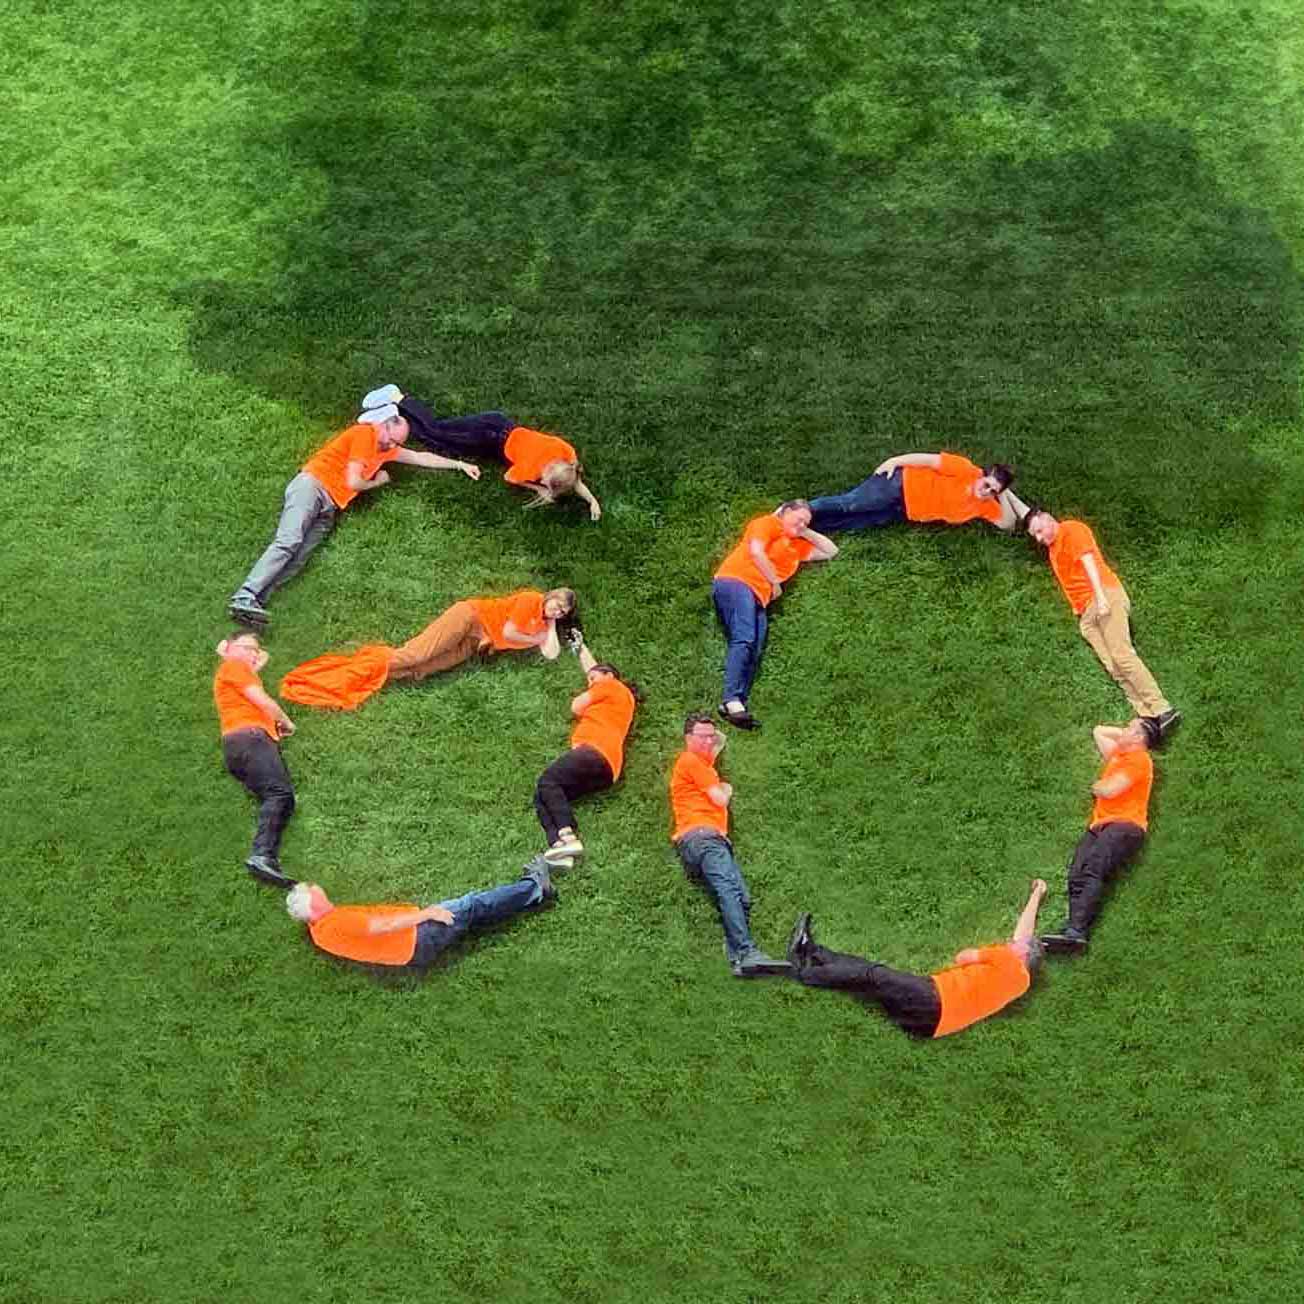 people forms 60 on grass